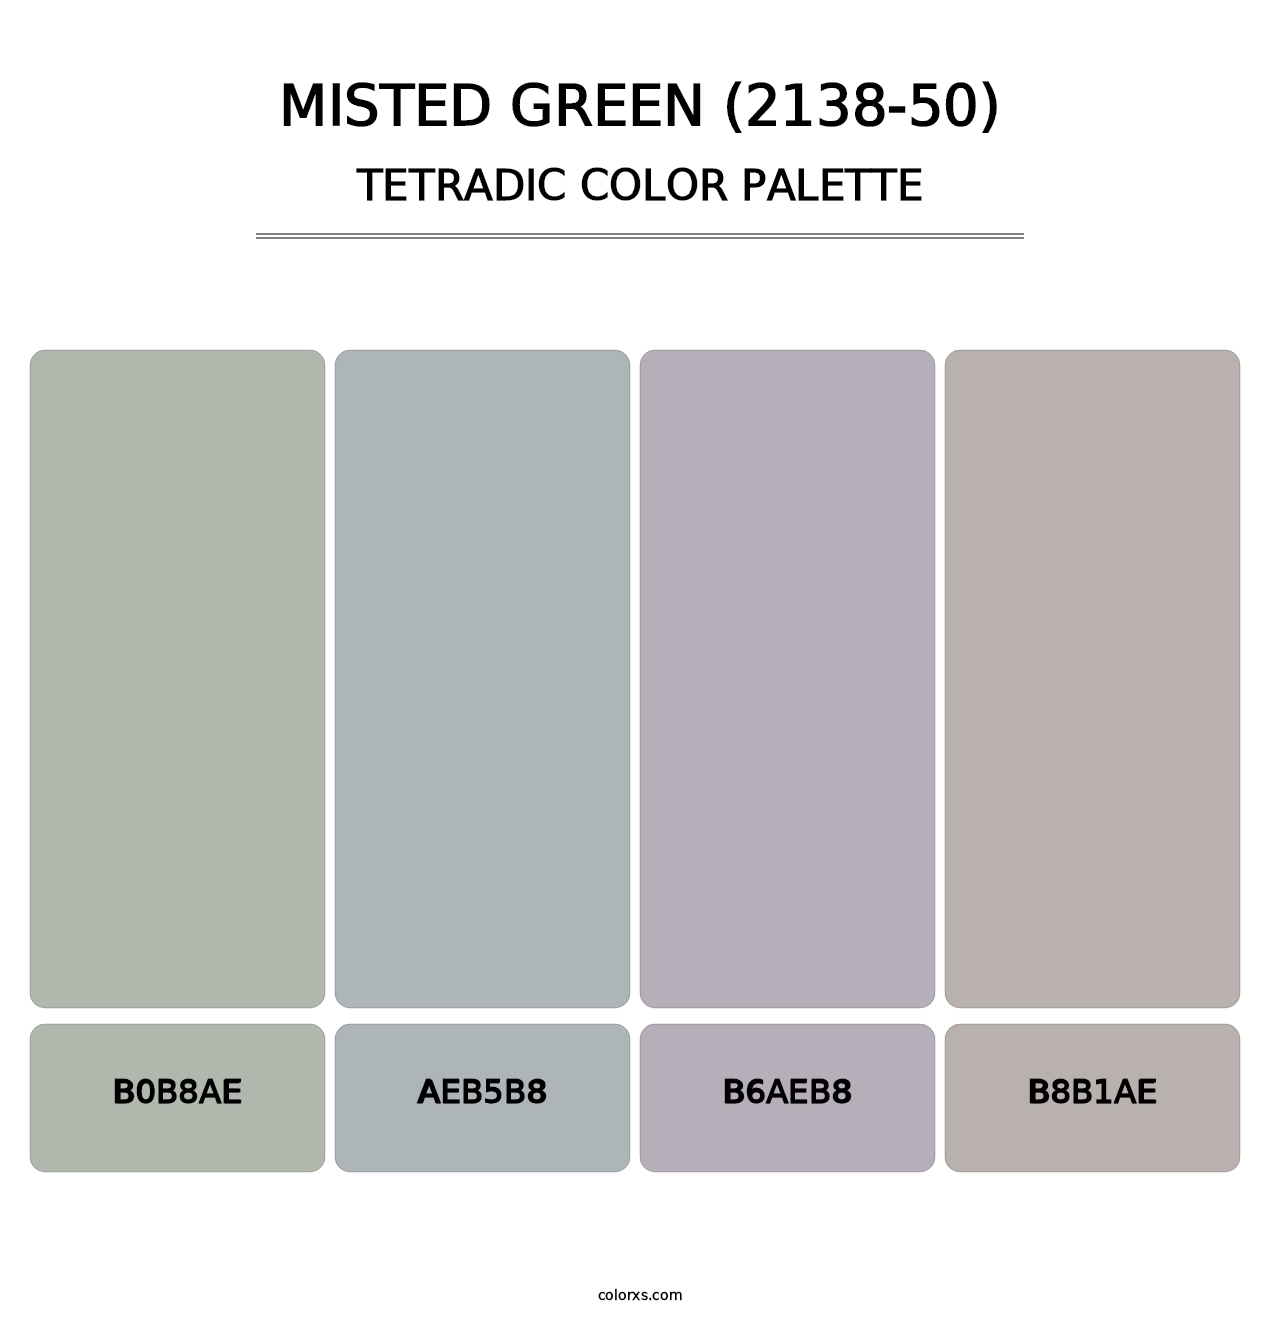 Misted Green (2138-50) - Tetradic Color Palette